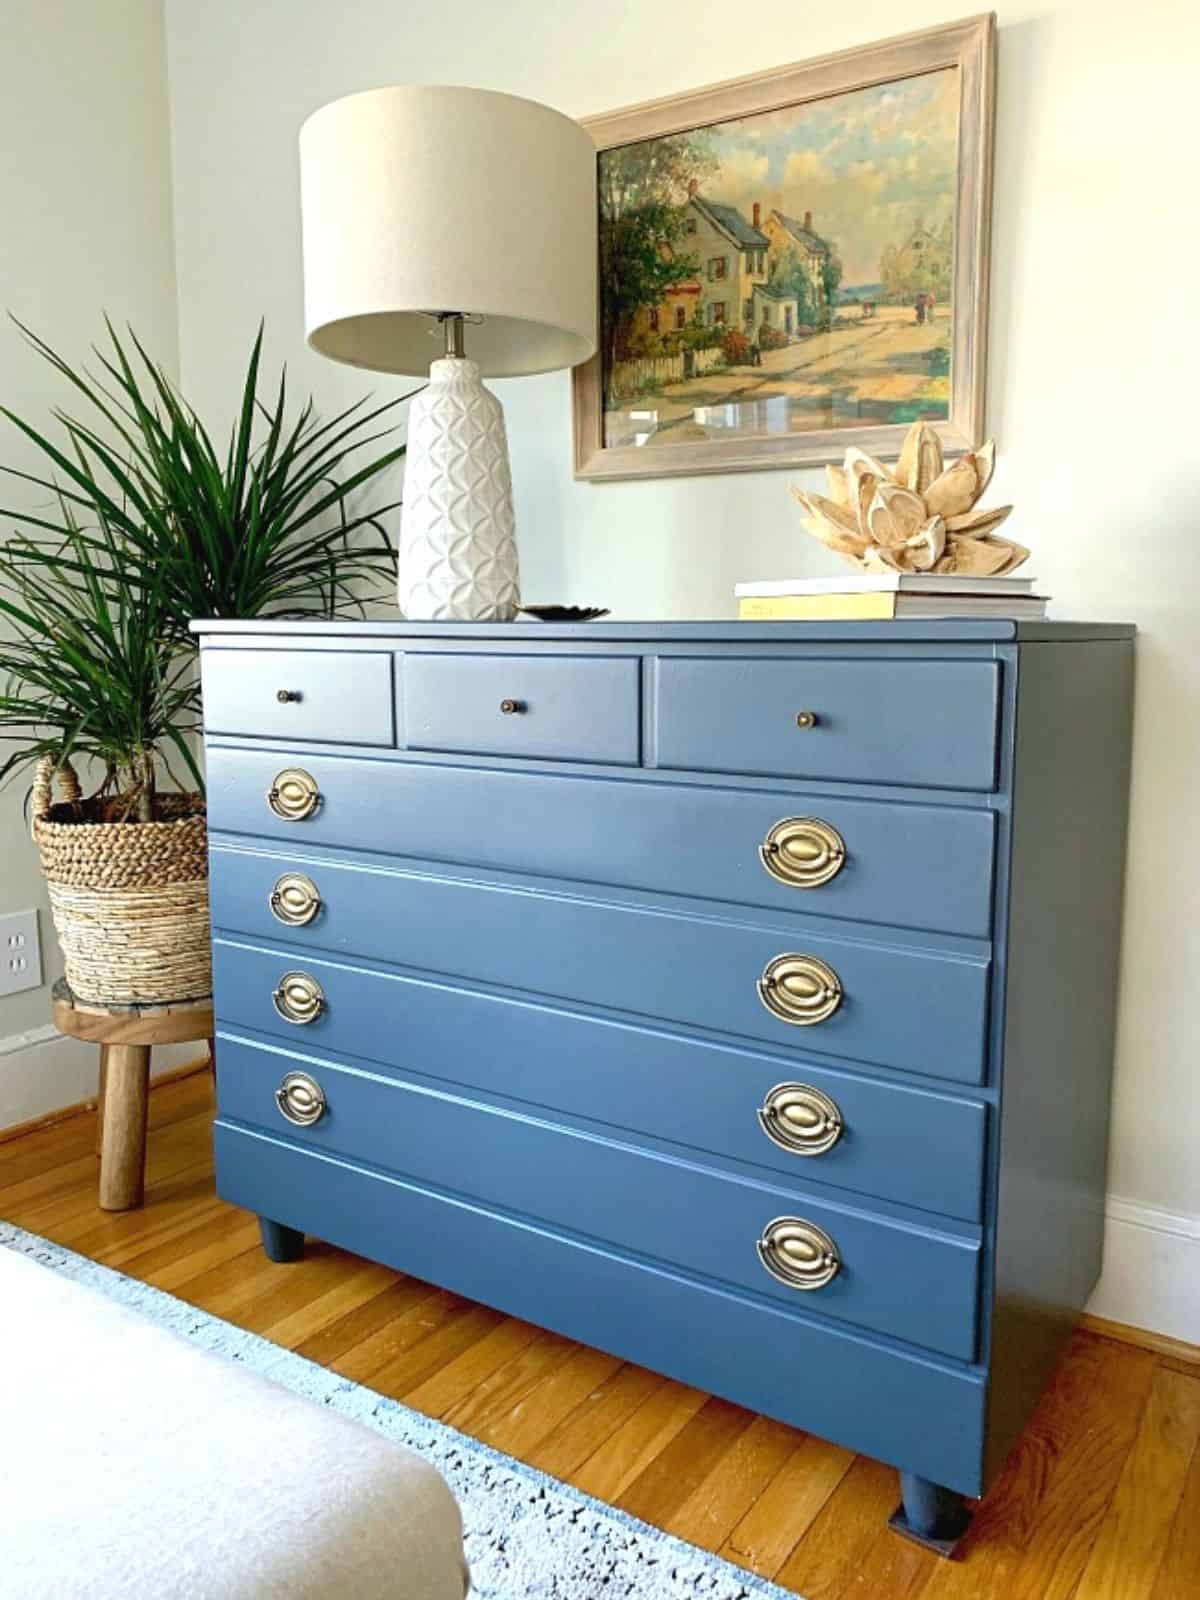 GoodWill dresser painted in navy with a white lamp on top